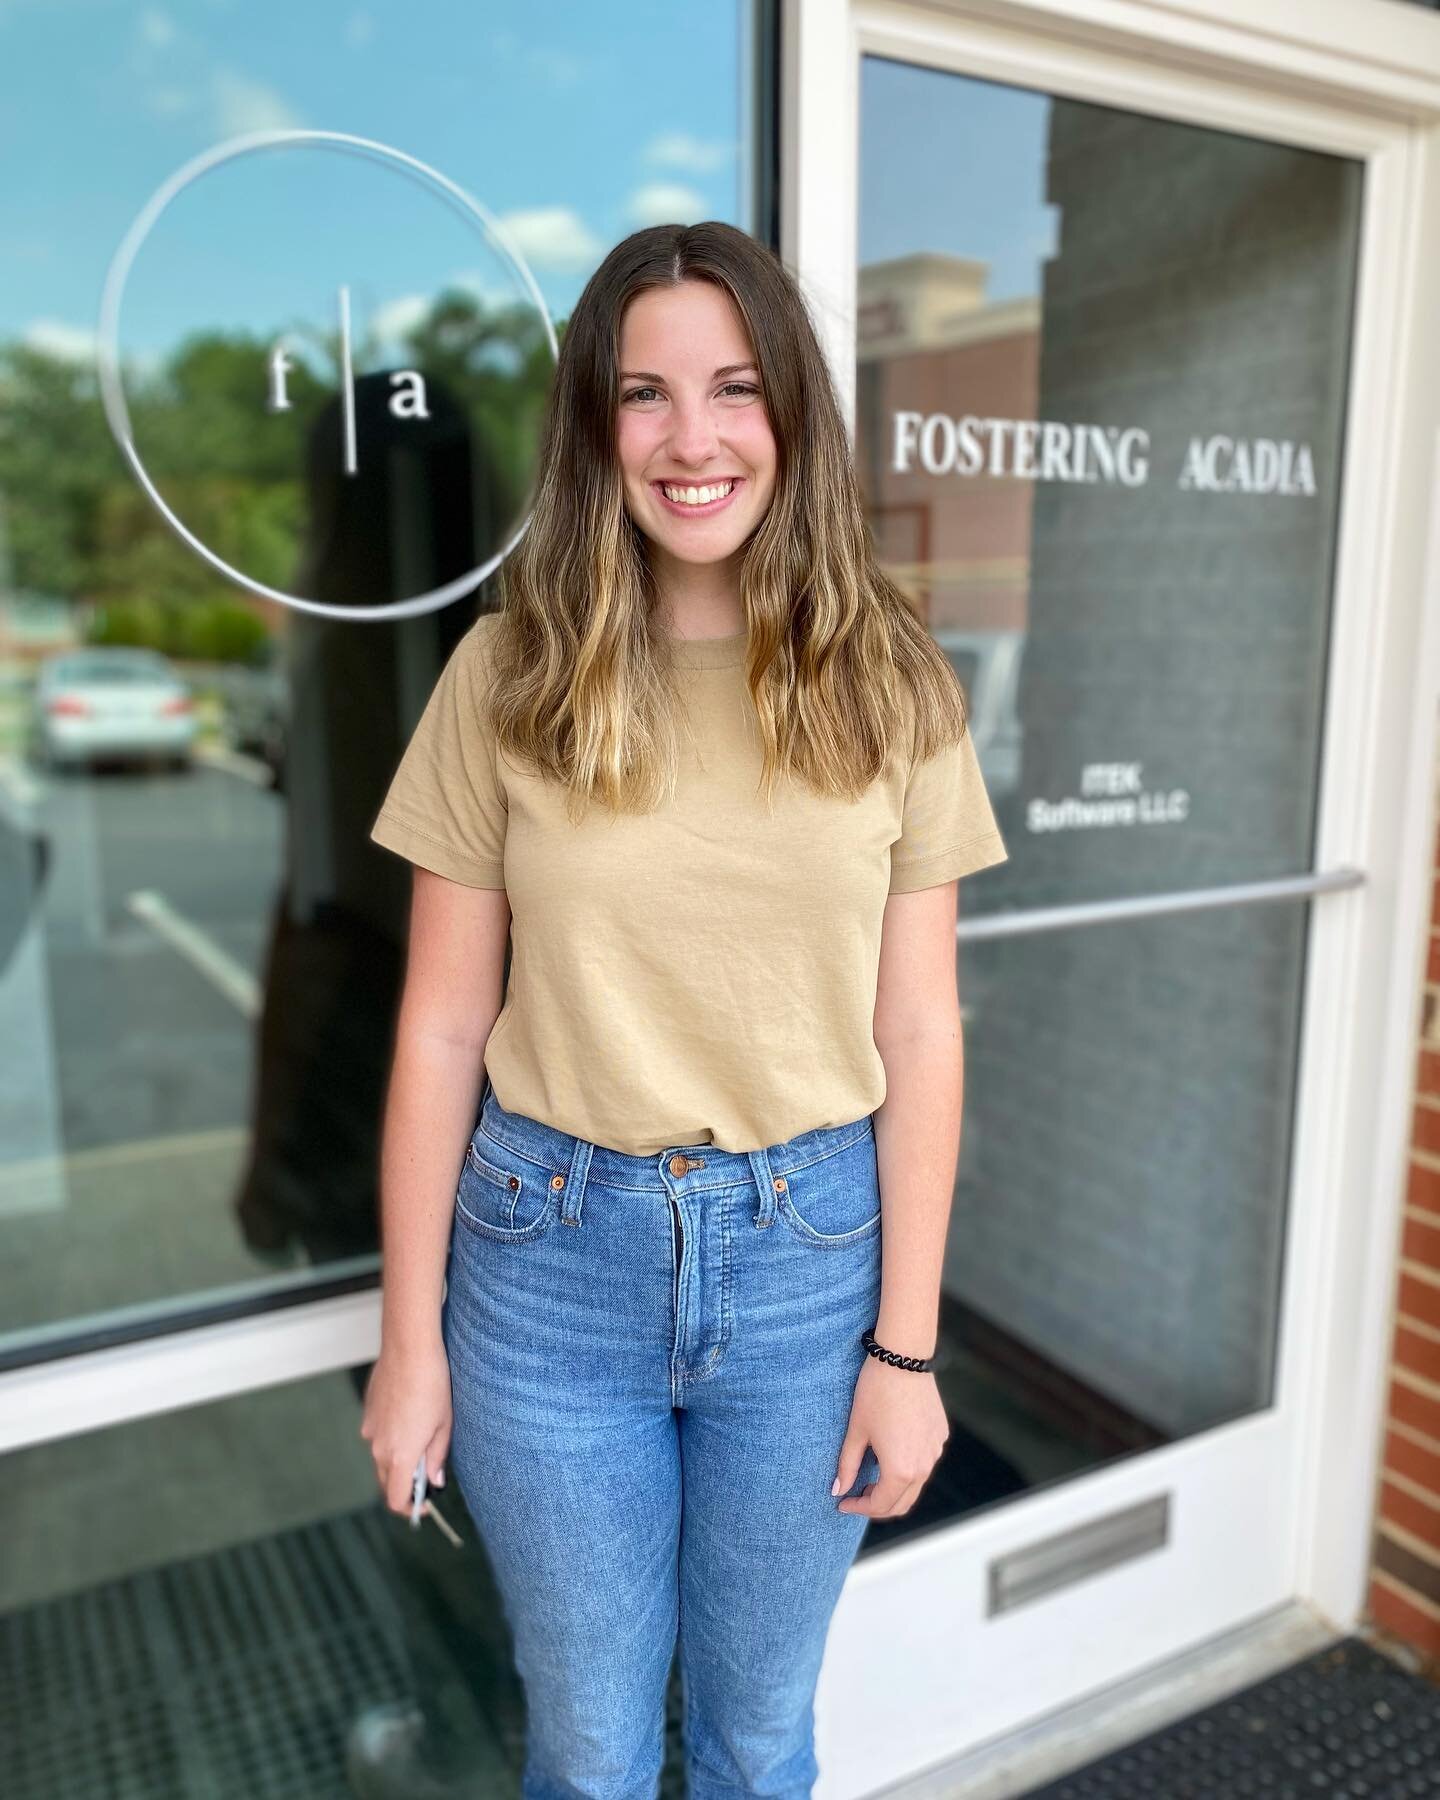 Say hello 👋🏽 to our newest FA staff, Ruthie! She joins the Case Aide team and will be supporting youth in the community to develop life skills and prepare for independence.

Welcome to the team, Ruthie! 🎉